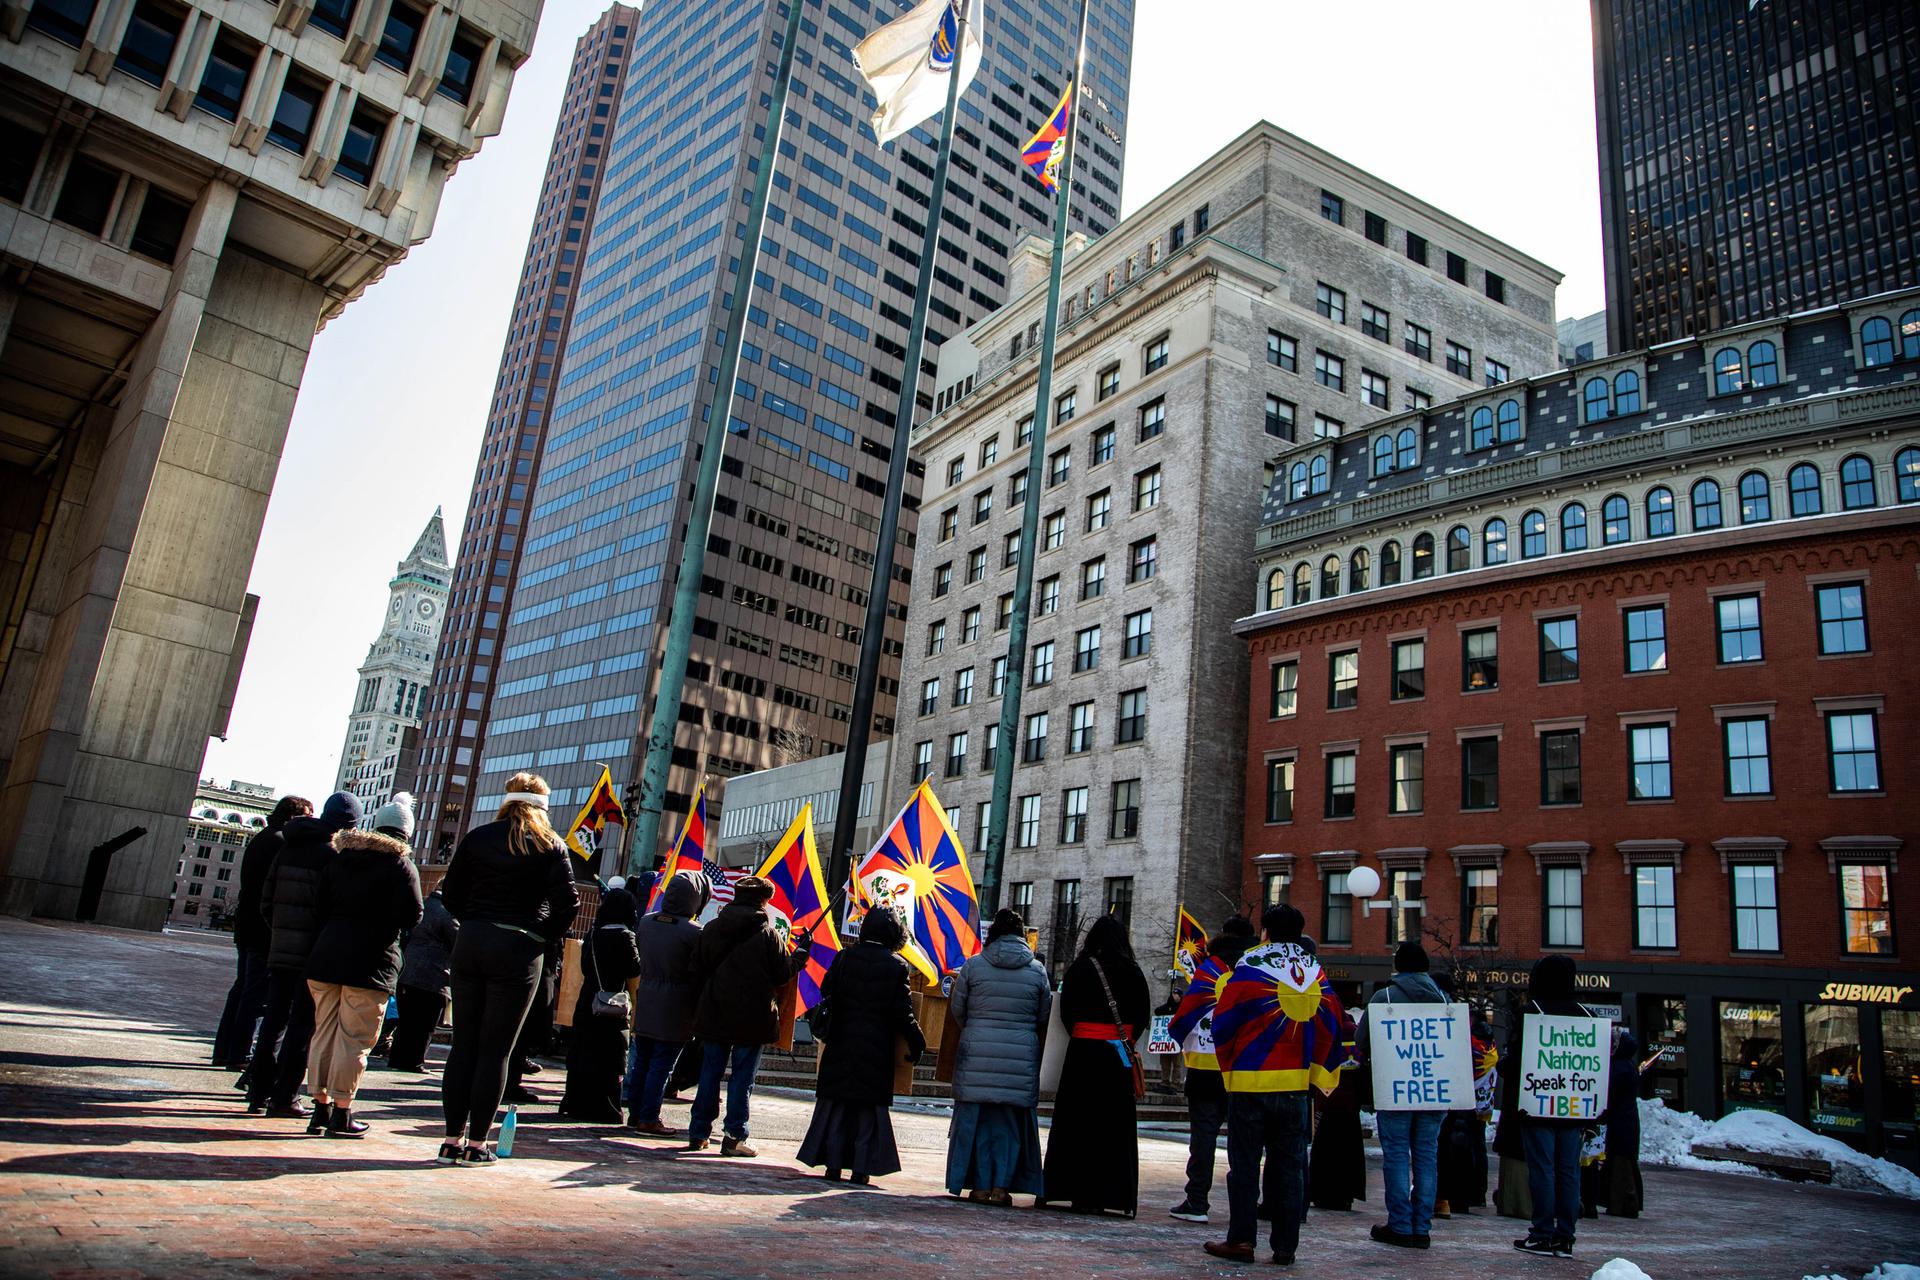 A group of people watch the Tibetan flag on a flagpole surrounded by the historic buildings of downtown Boston